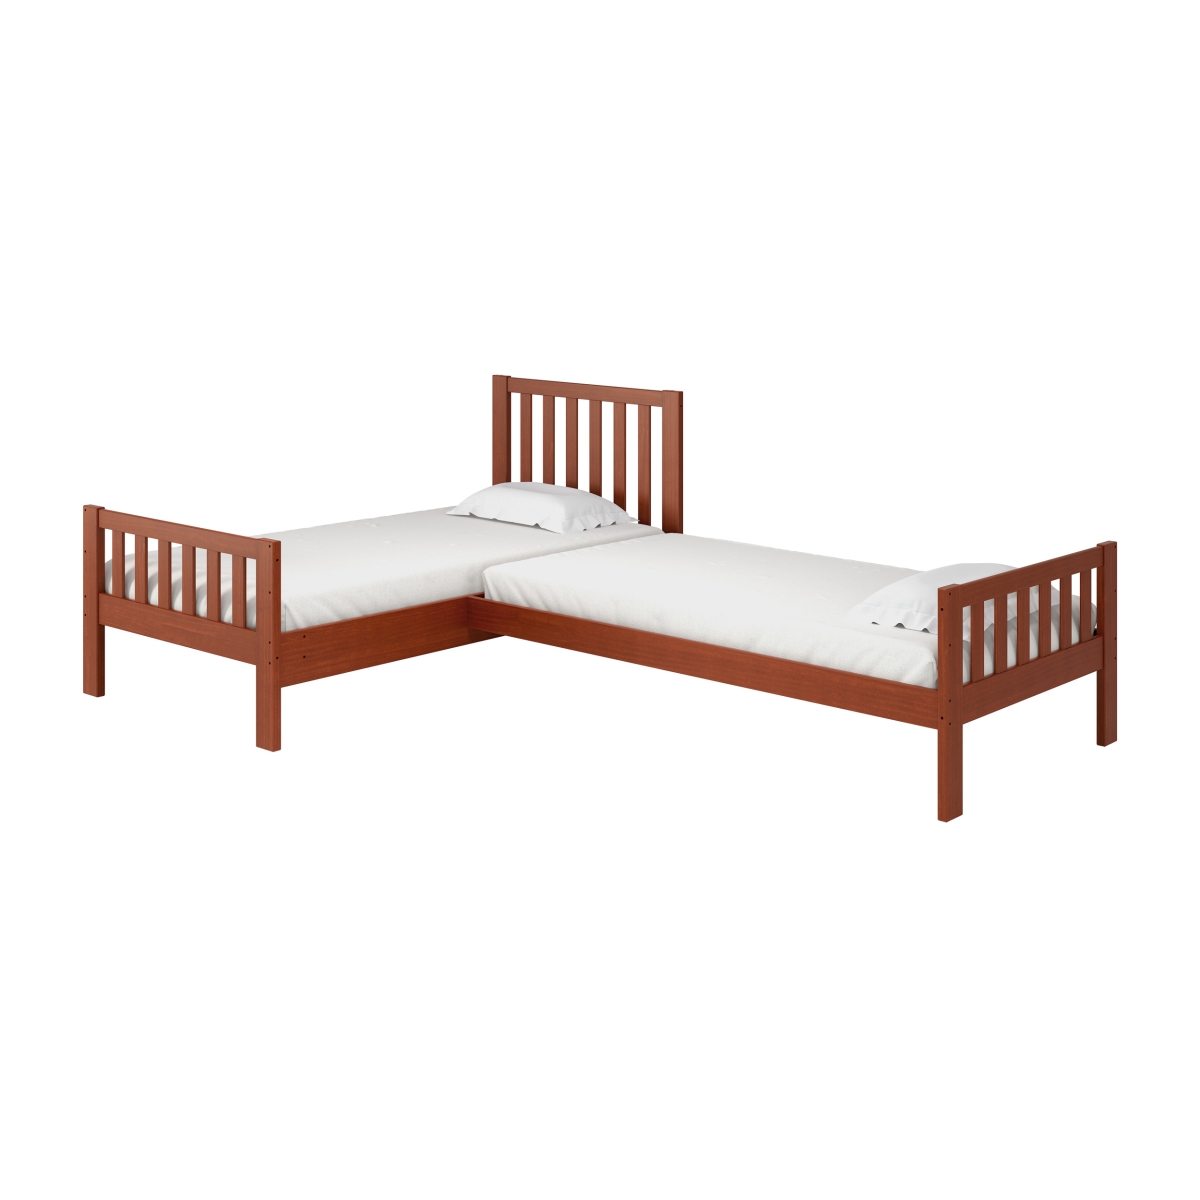 Picture of Alaterre AJAU1170 Aurora Corner L-Shaped Twin Wood Bed Set, Chestnut